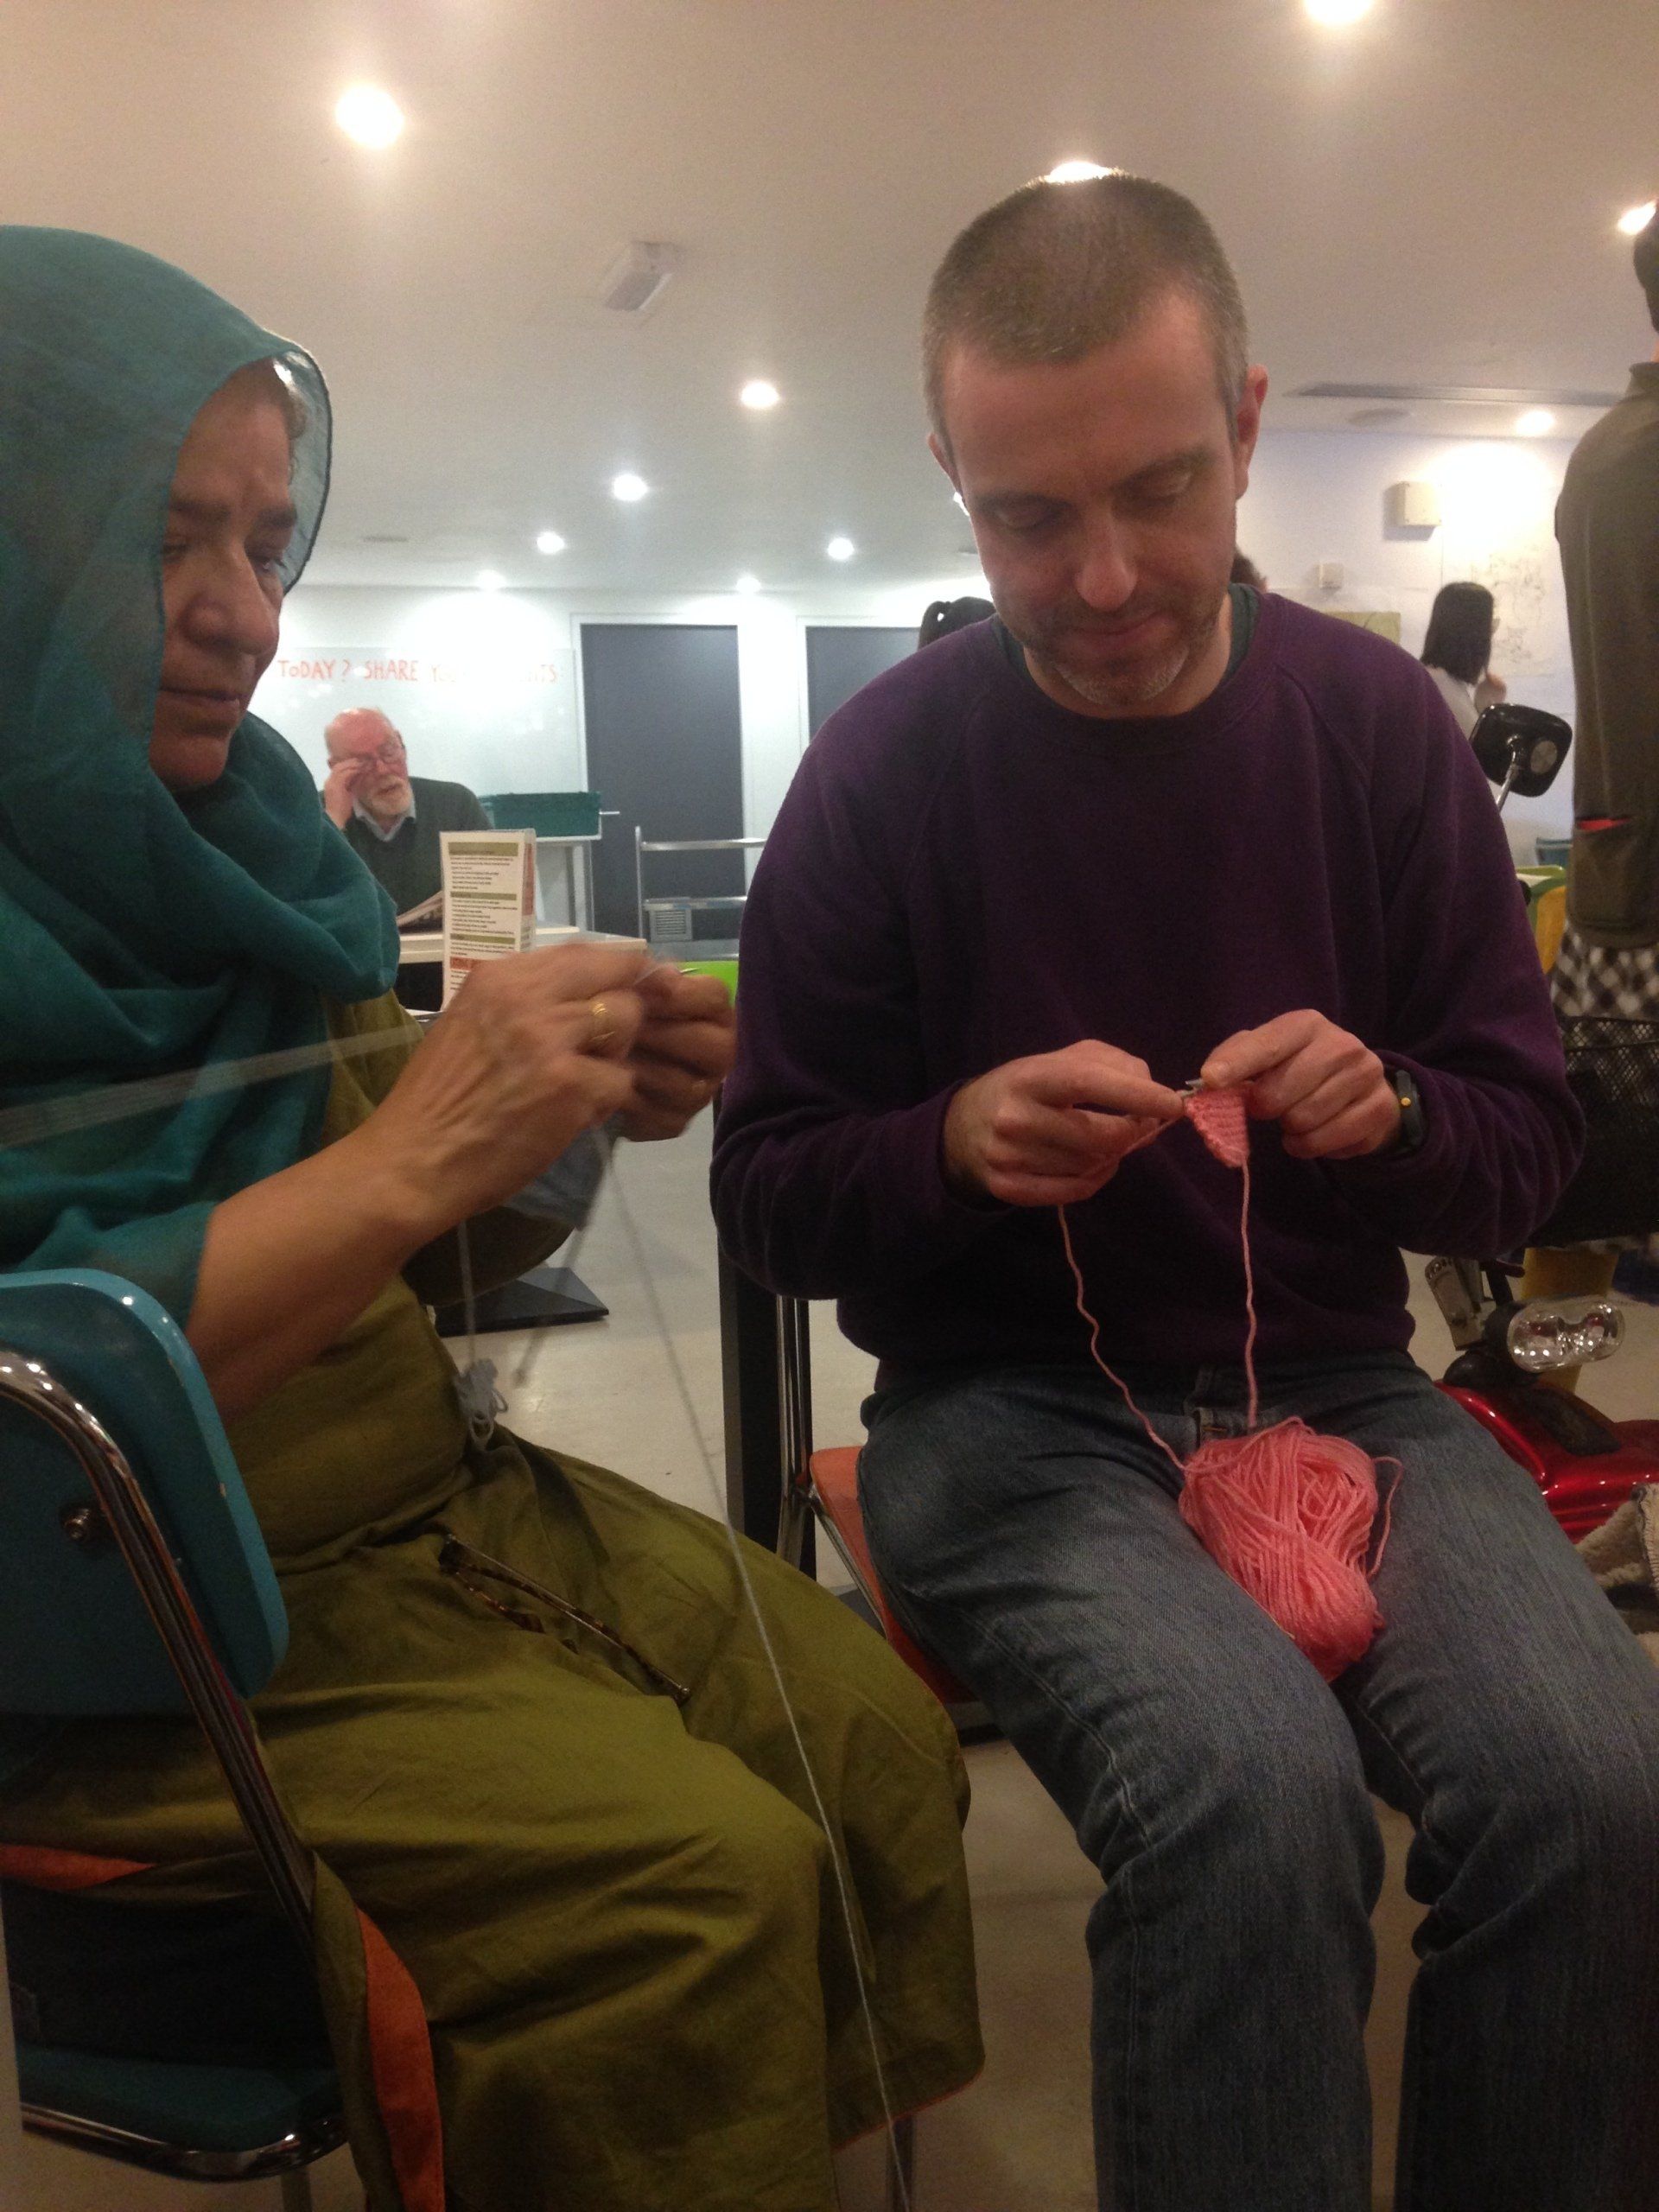 a man and a woman are knitting together in a room